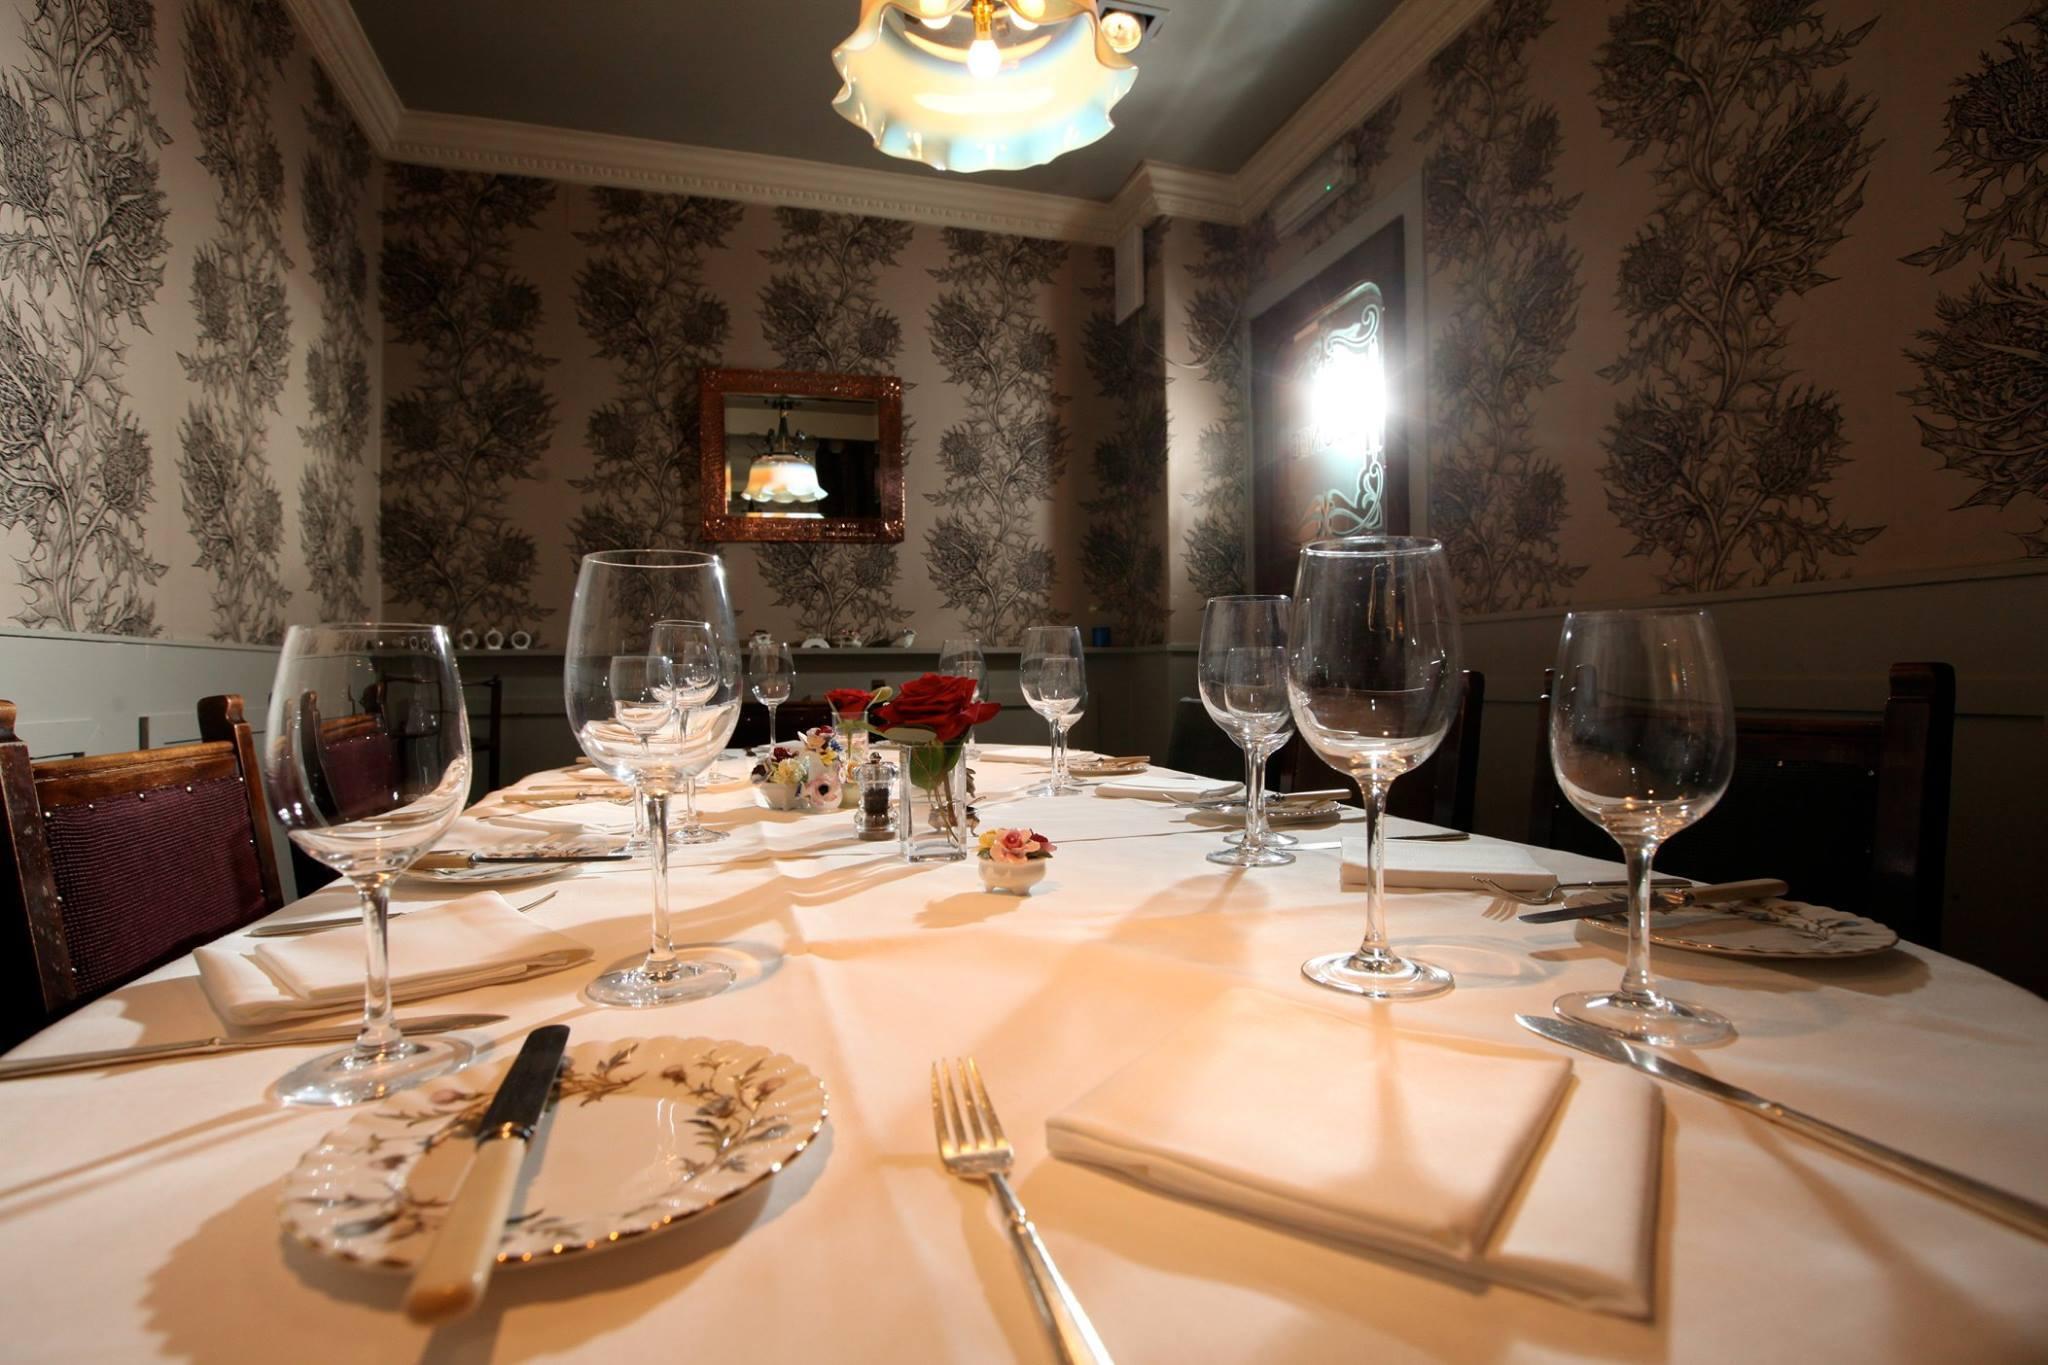 The Buttery Dining Room, The Buttery photo #2